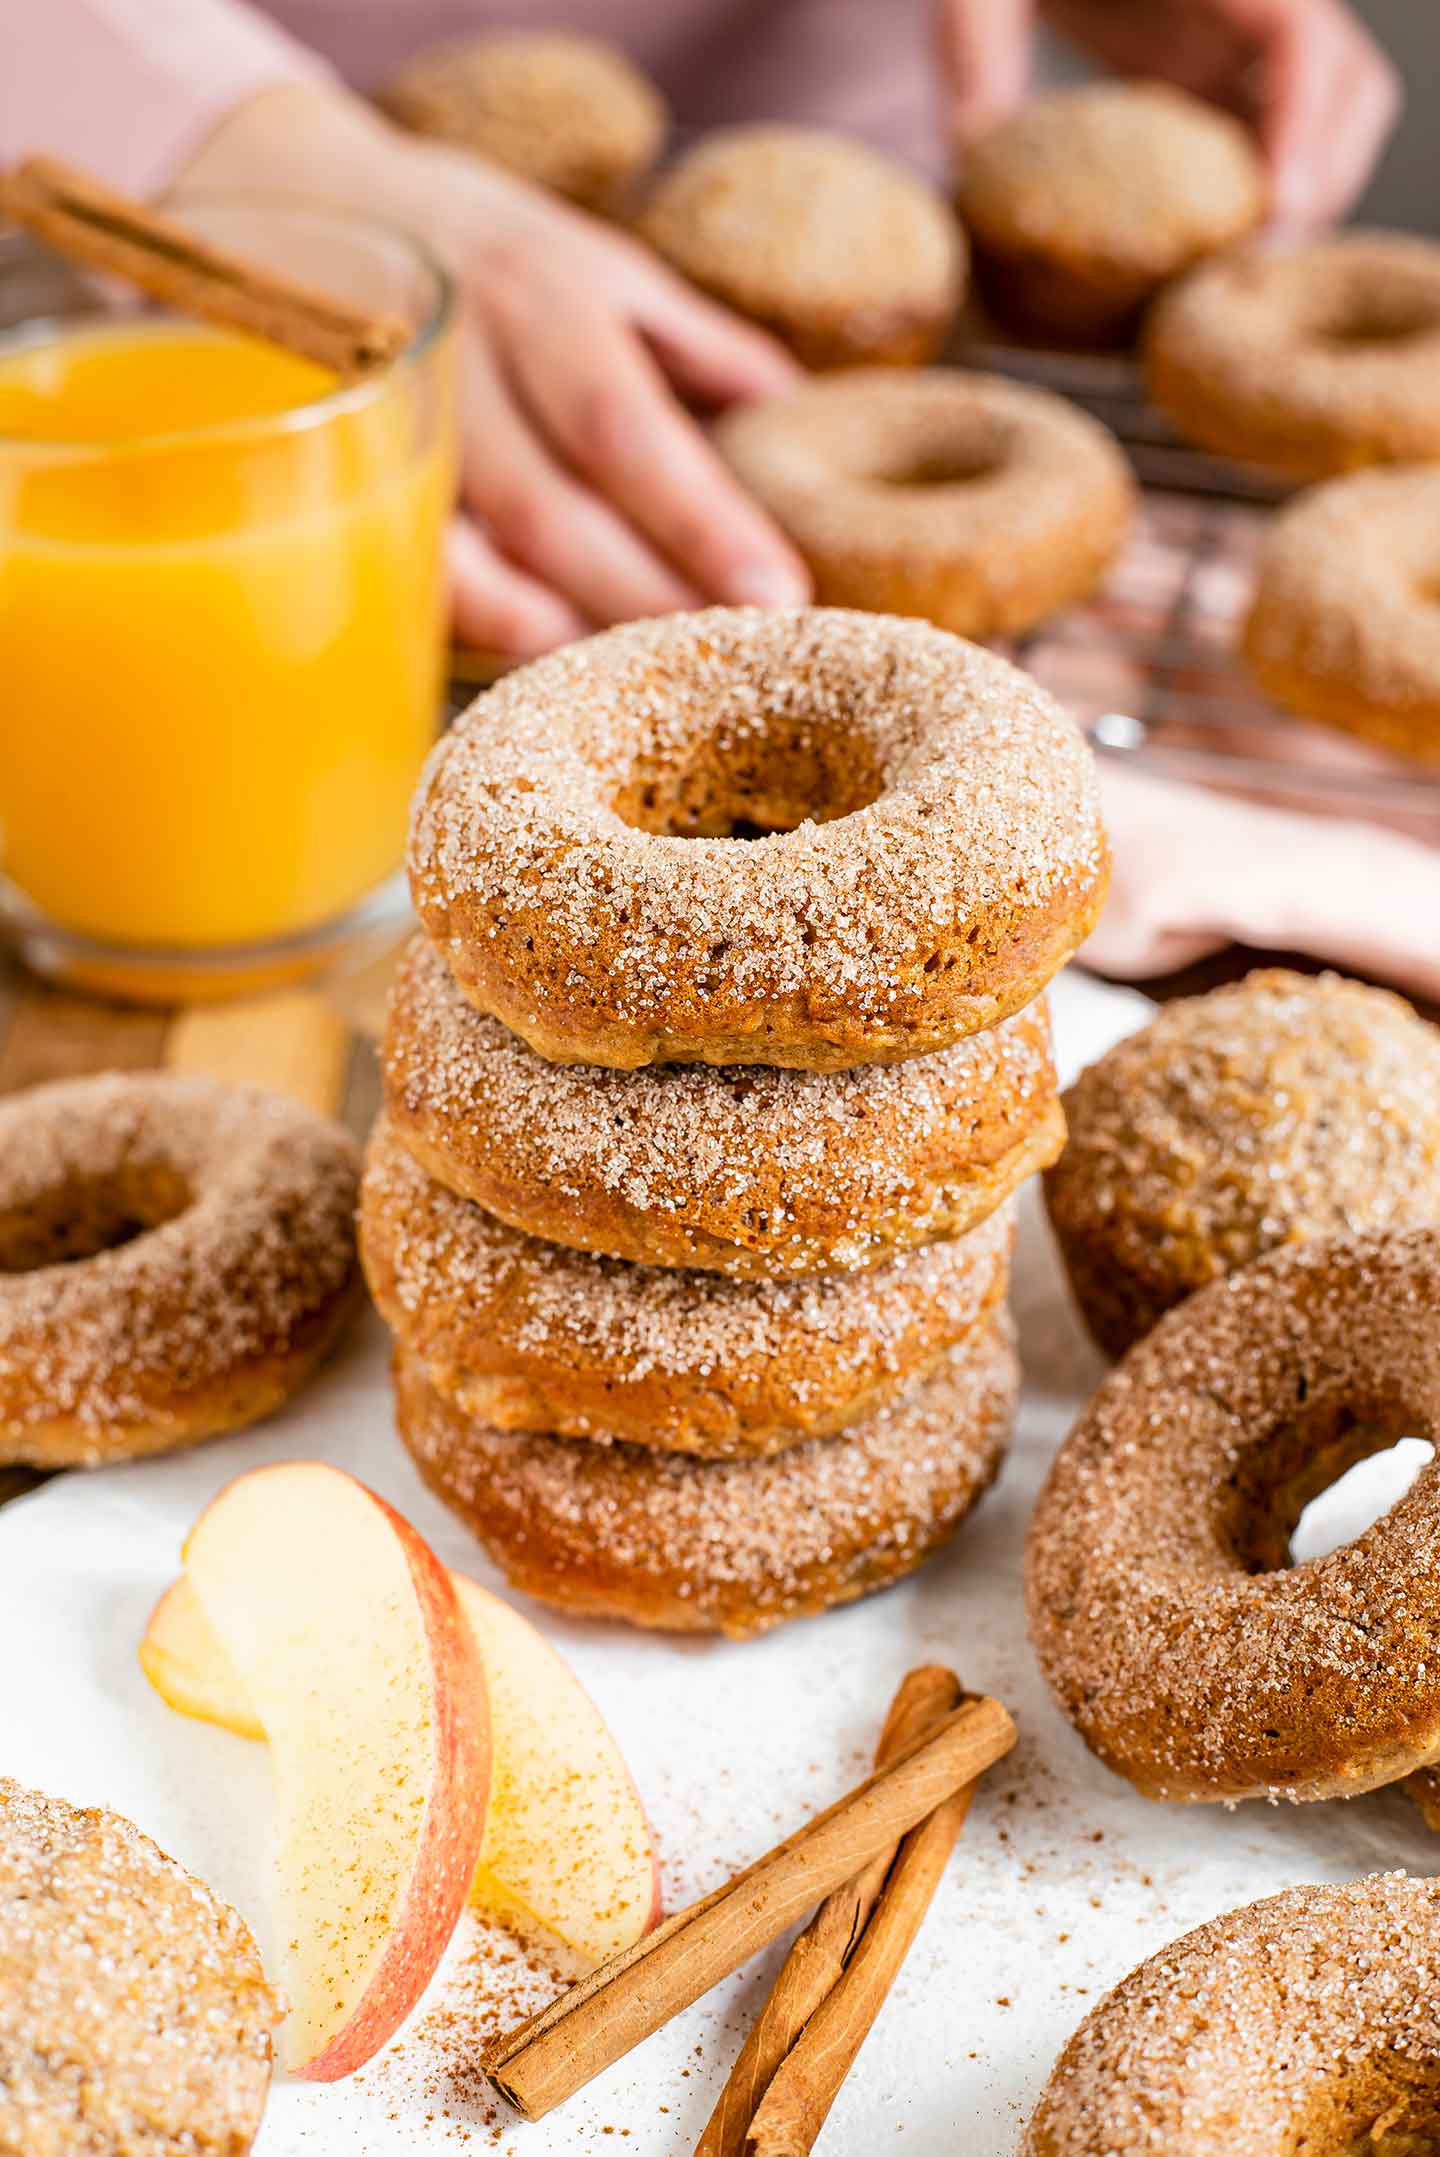 Side view of apple cider doughnuts stacked on a white tray. The top of the doughnuts are sprinkled with cinnamon sugar, the remaining doughnuts are scattered around, and apple cider muffins can also be seen.